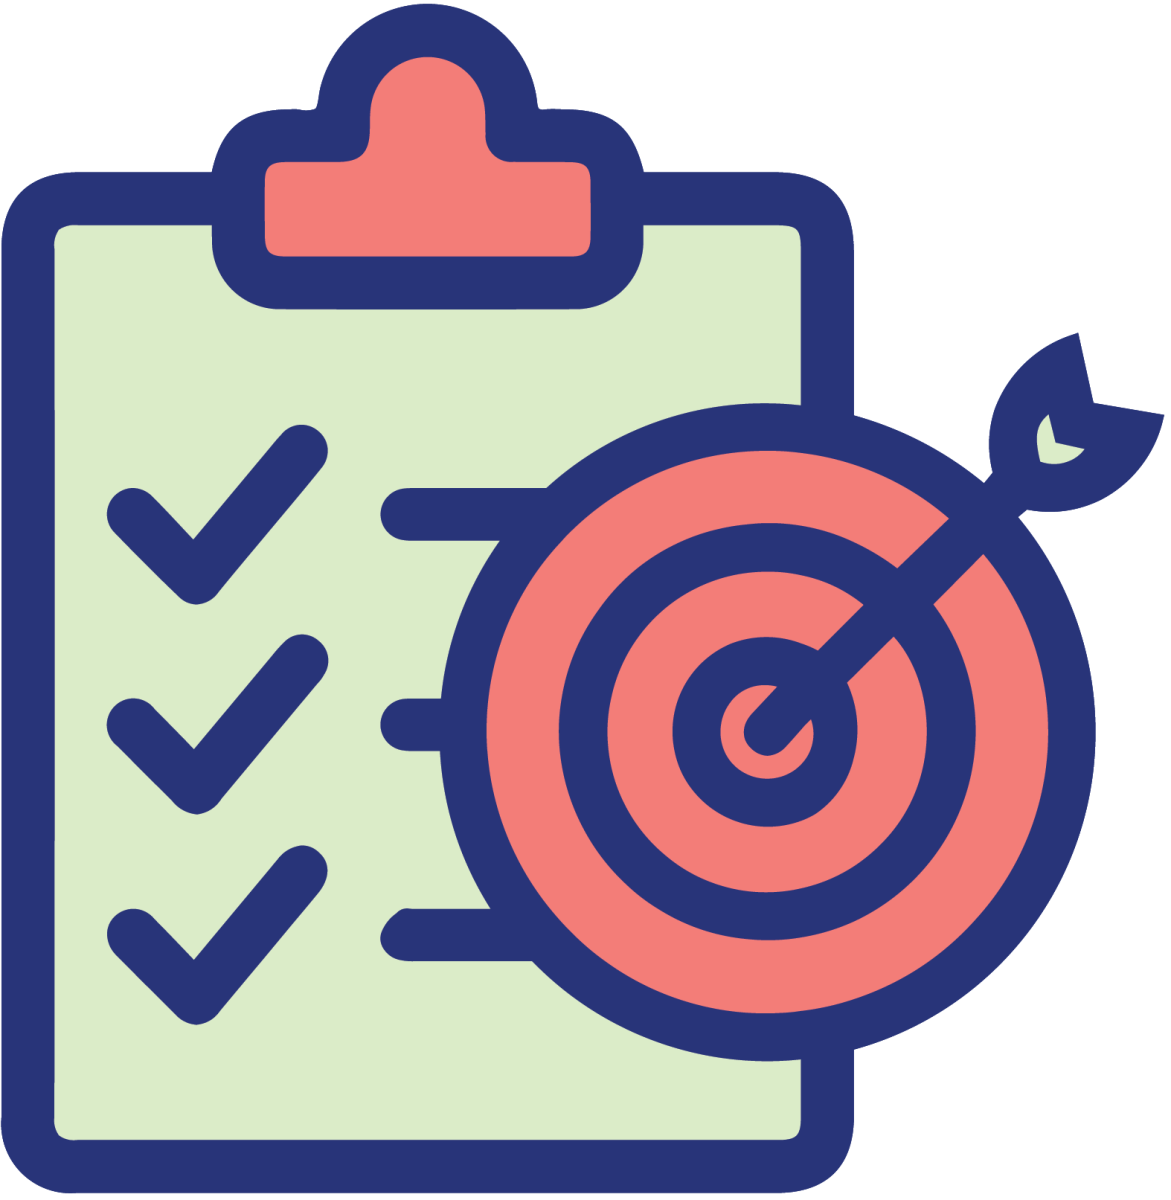 "Clipboard and target icon for Data"